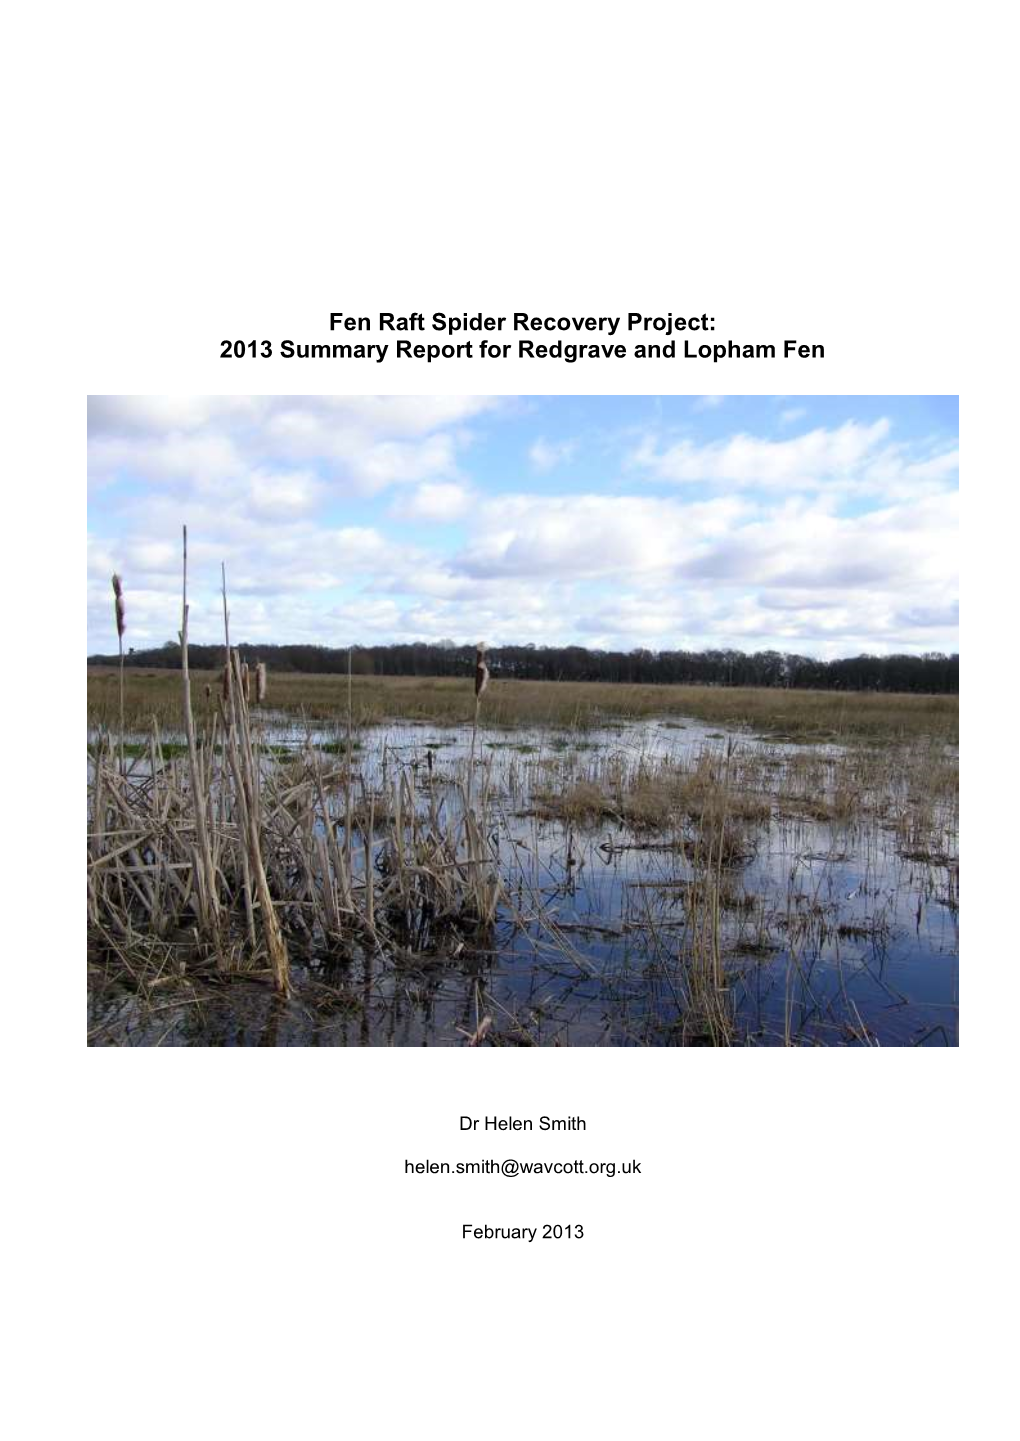 Unpublished Report to Natural England, Peterborough Smith, H